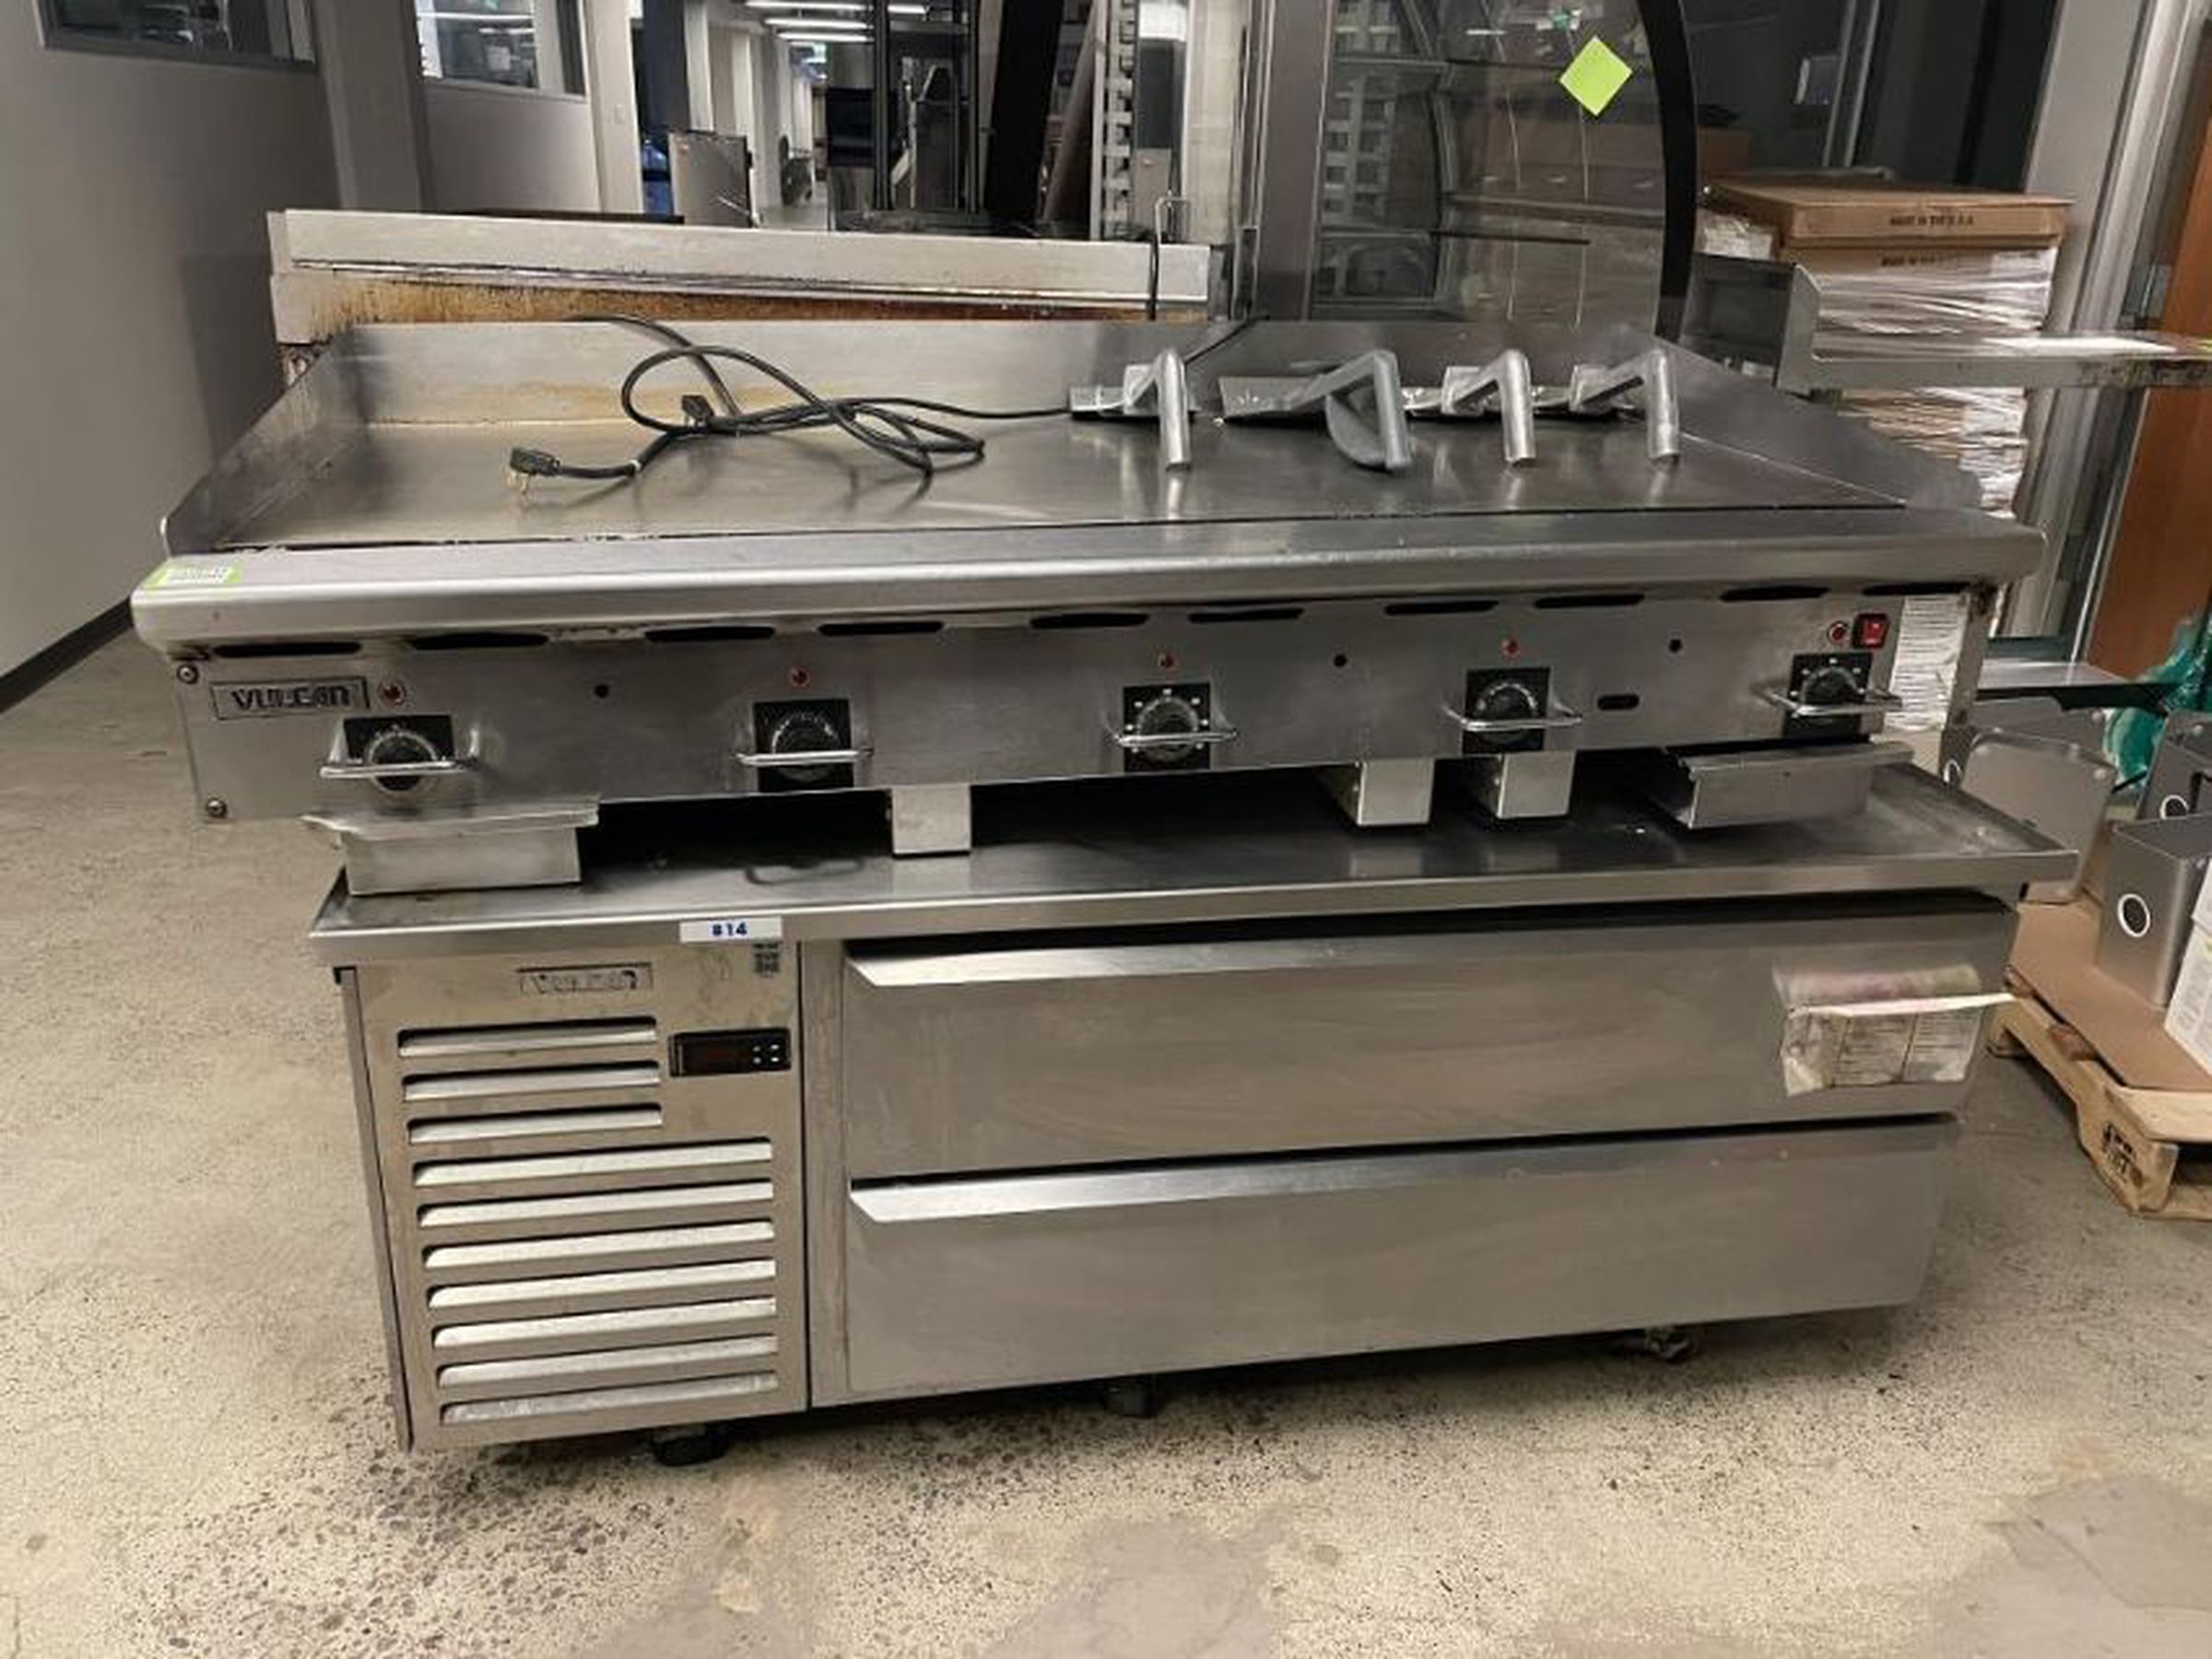 <em>Coffee machines, rotisserie ovens, and industrial griddles are also listed on the online auction.</em>